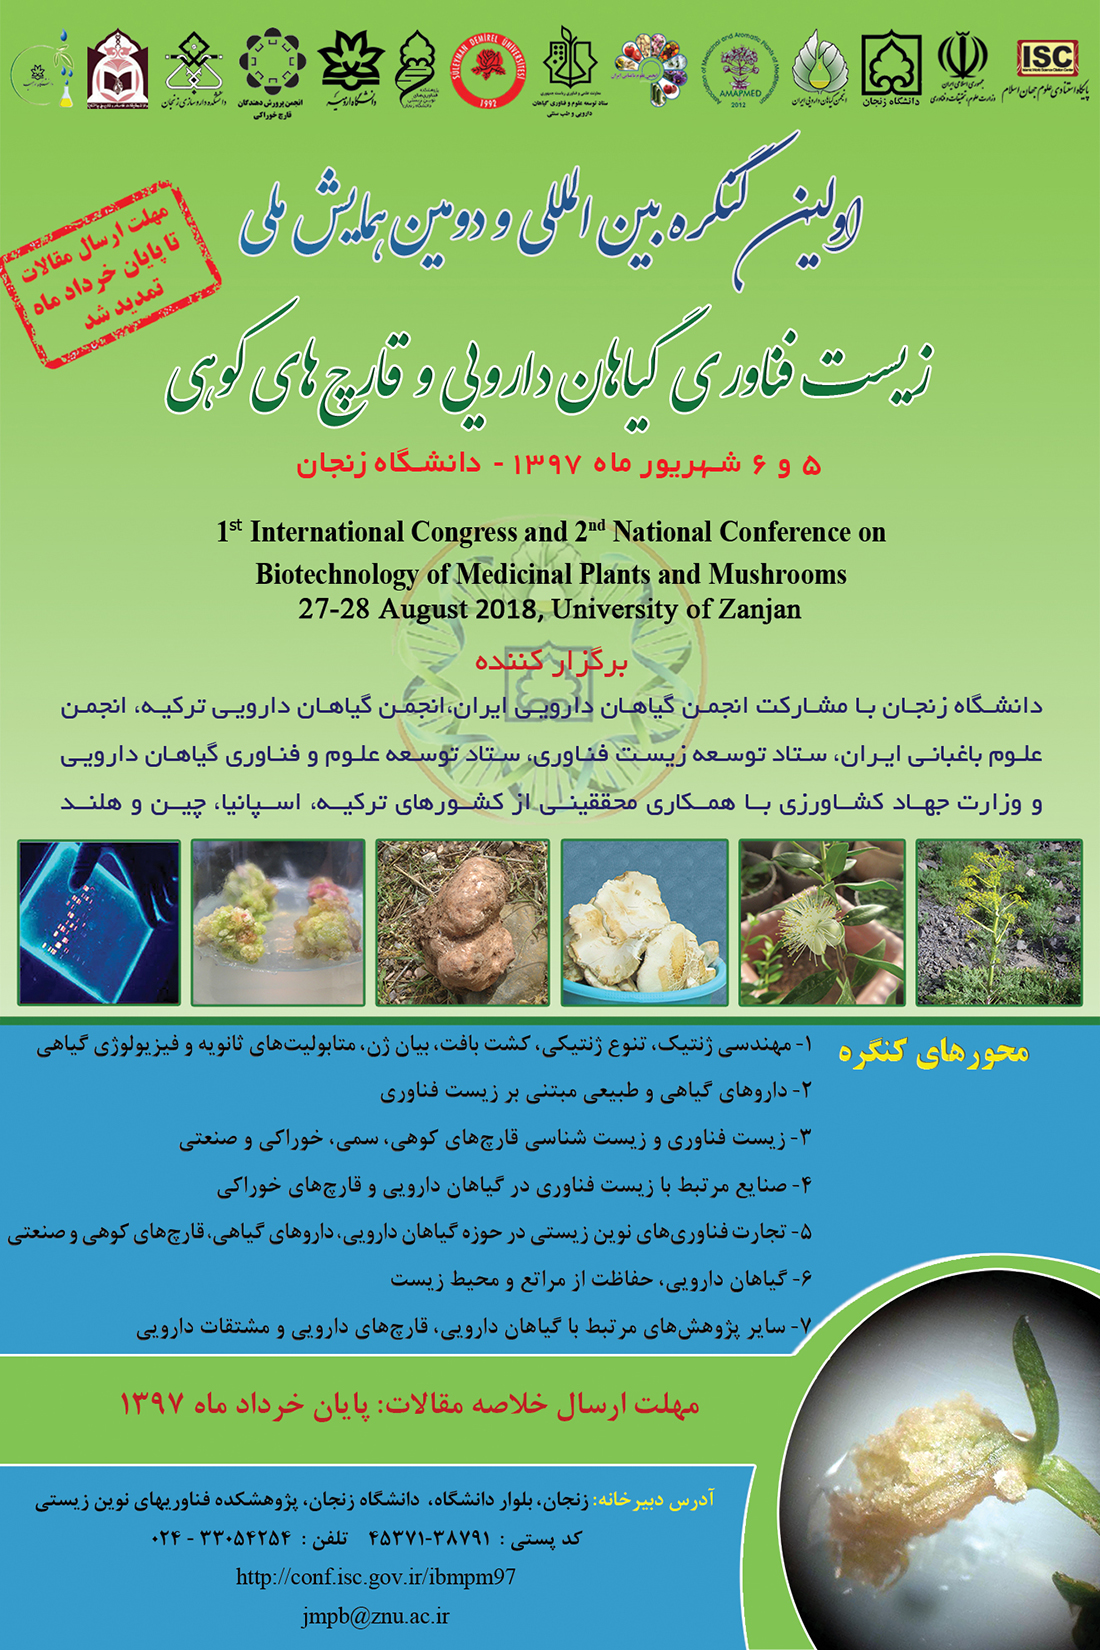 Iran’s 1st International Congress and 2nd National Conference on Biotechnology of Medicinal Plants and Mushrooms